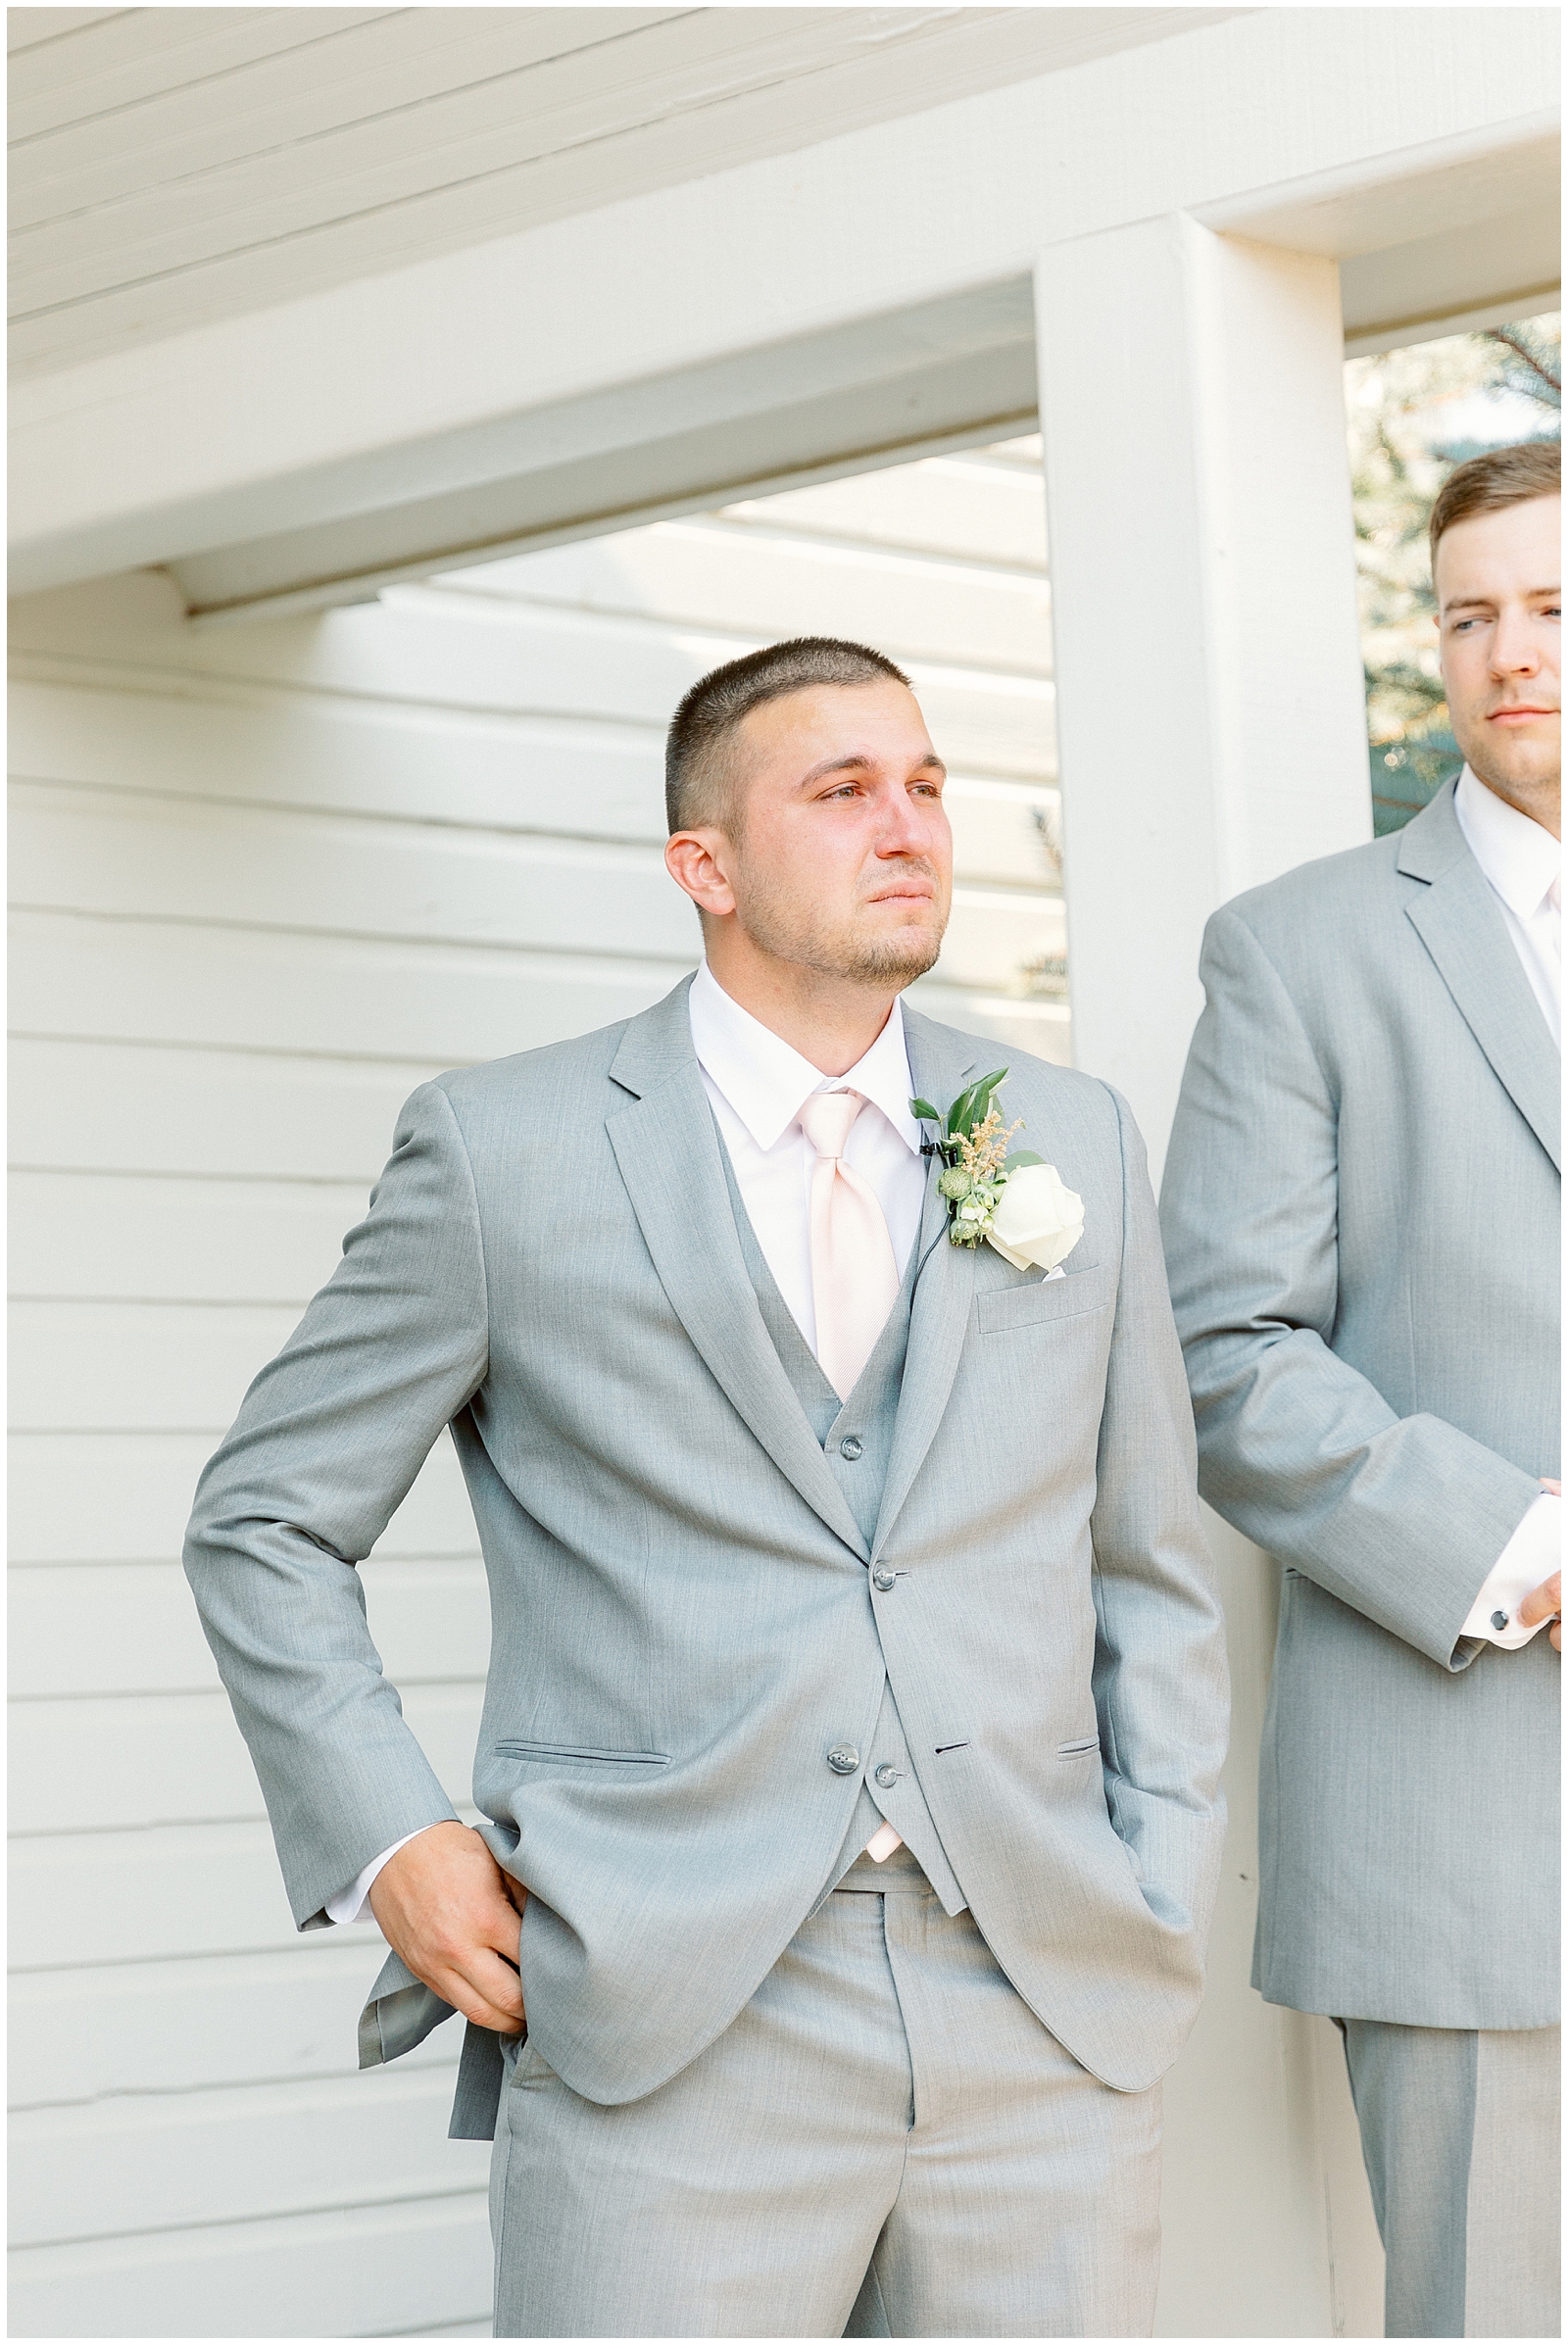 Groom's Reaction as his bride walks down the aisle at Blush Still Water Hollow Wedding